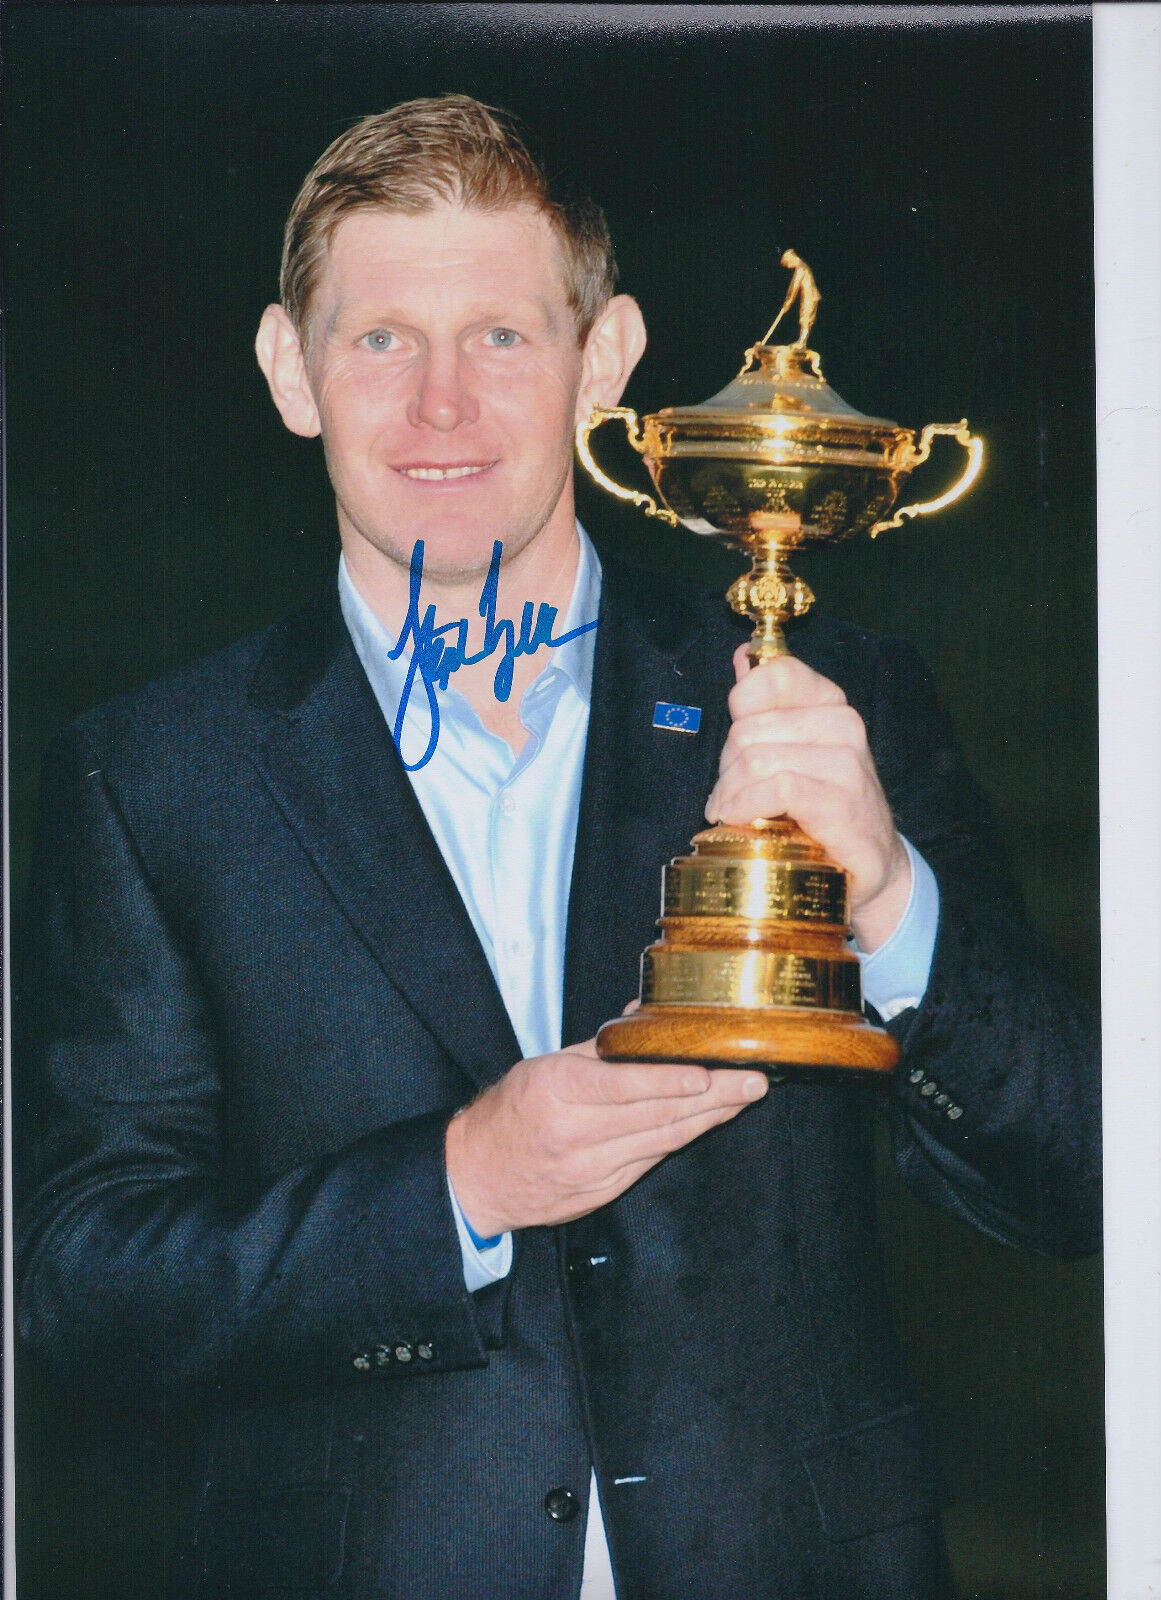 Stephen GALLACHER SIGNED Autograph 12x8 Photo Poster painting AFTAL COA 2014 Ryder Cup WINNER